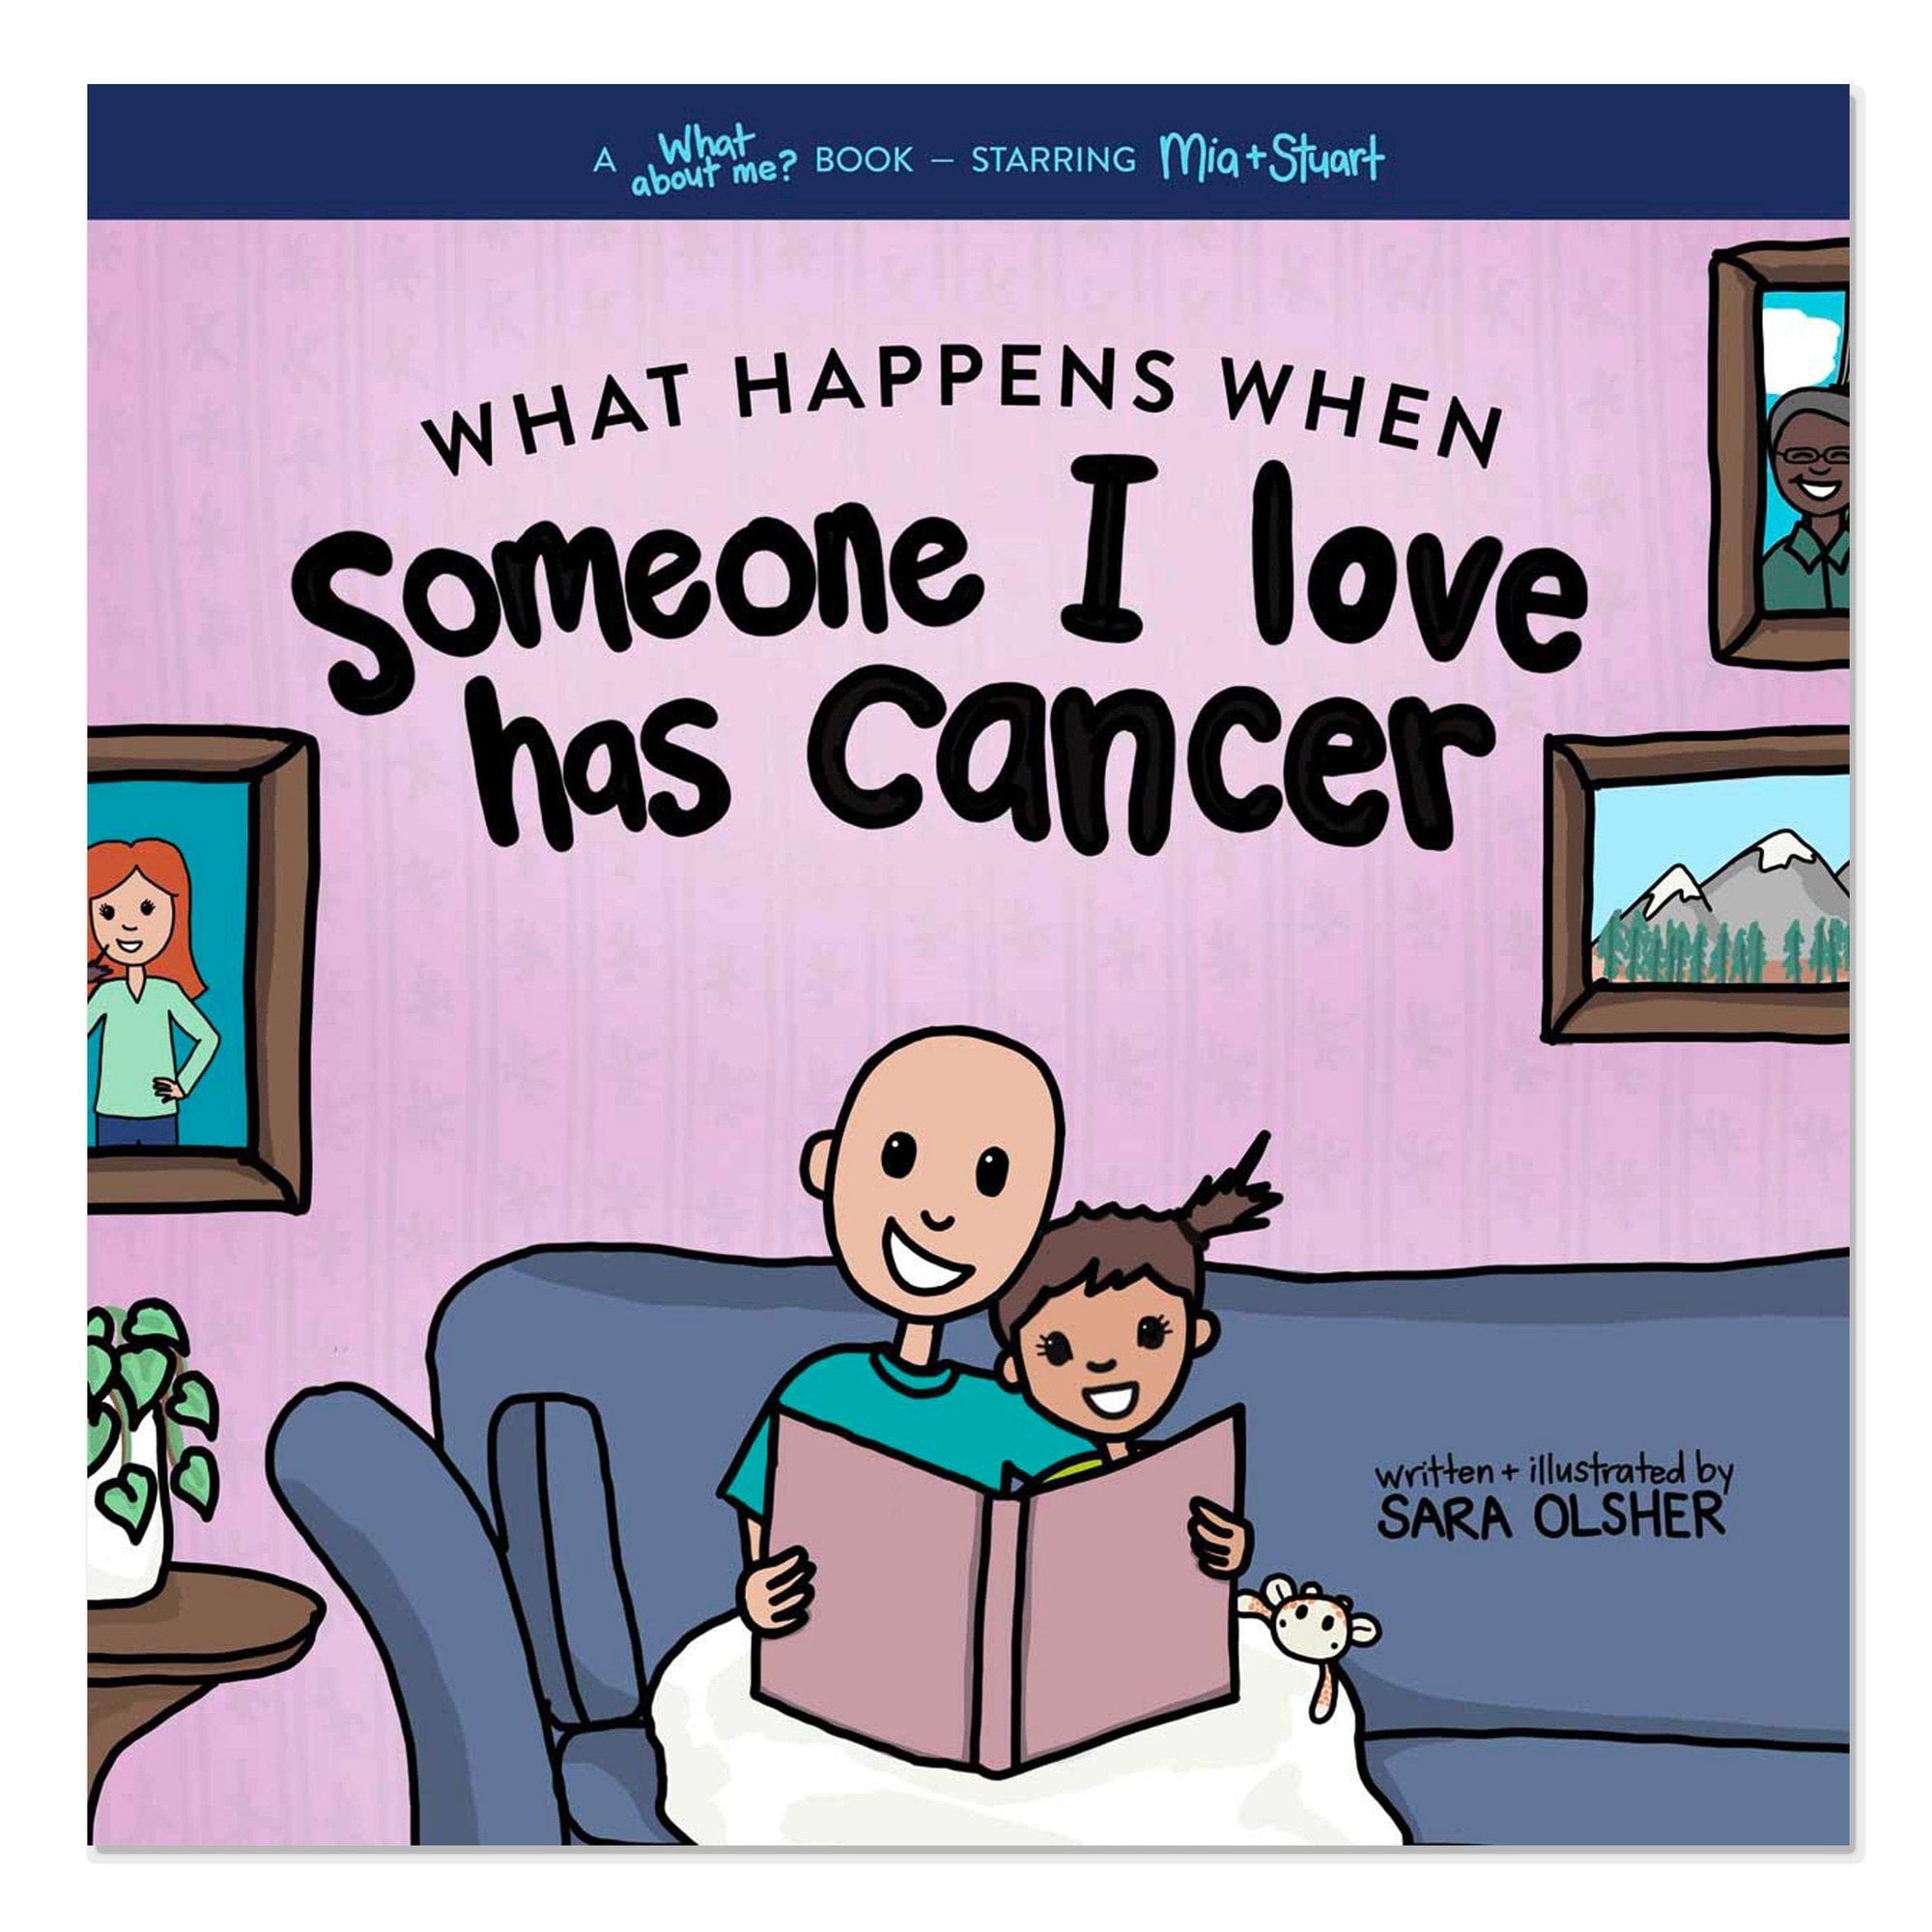 What Happens When Someone I Love Has Cancer book by Sara Olsher